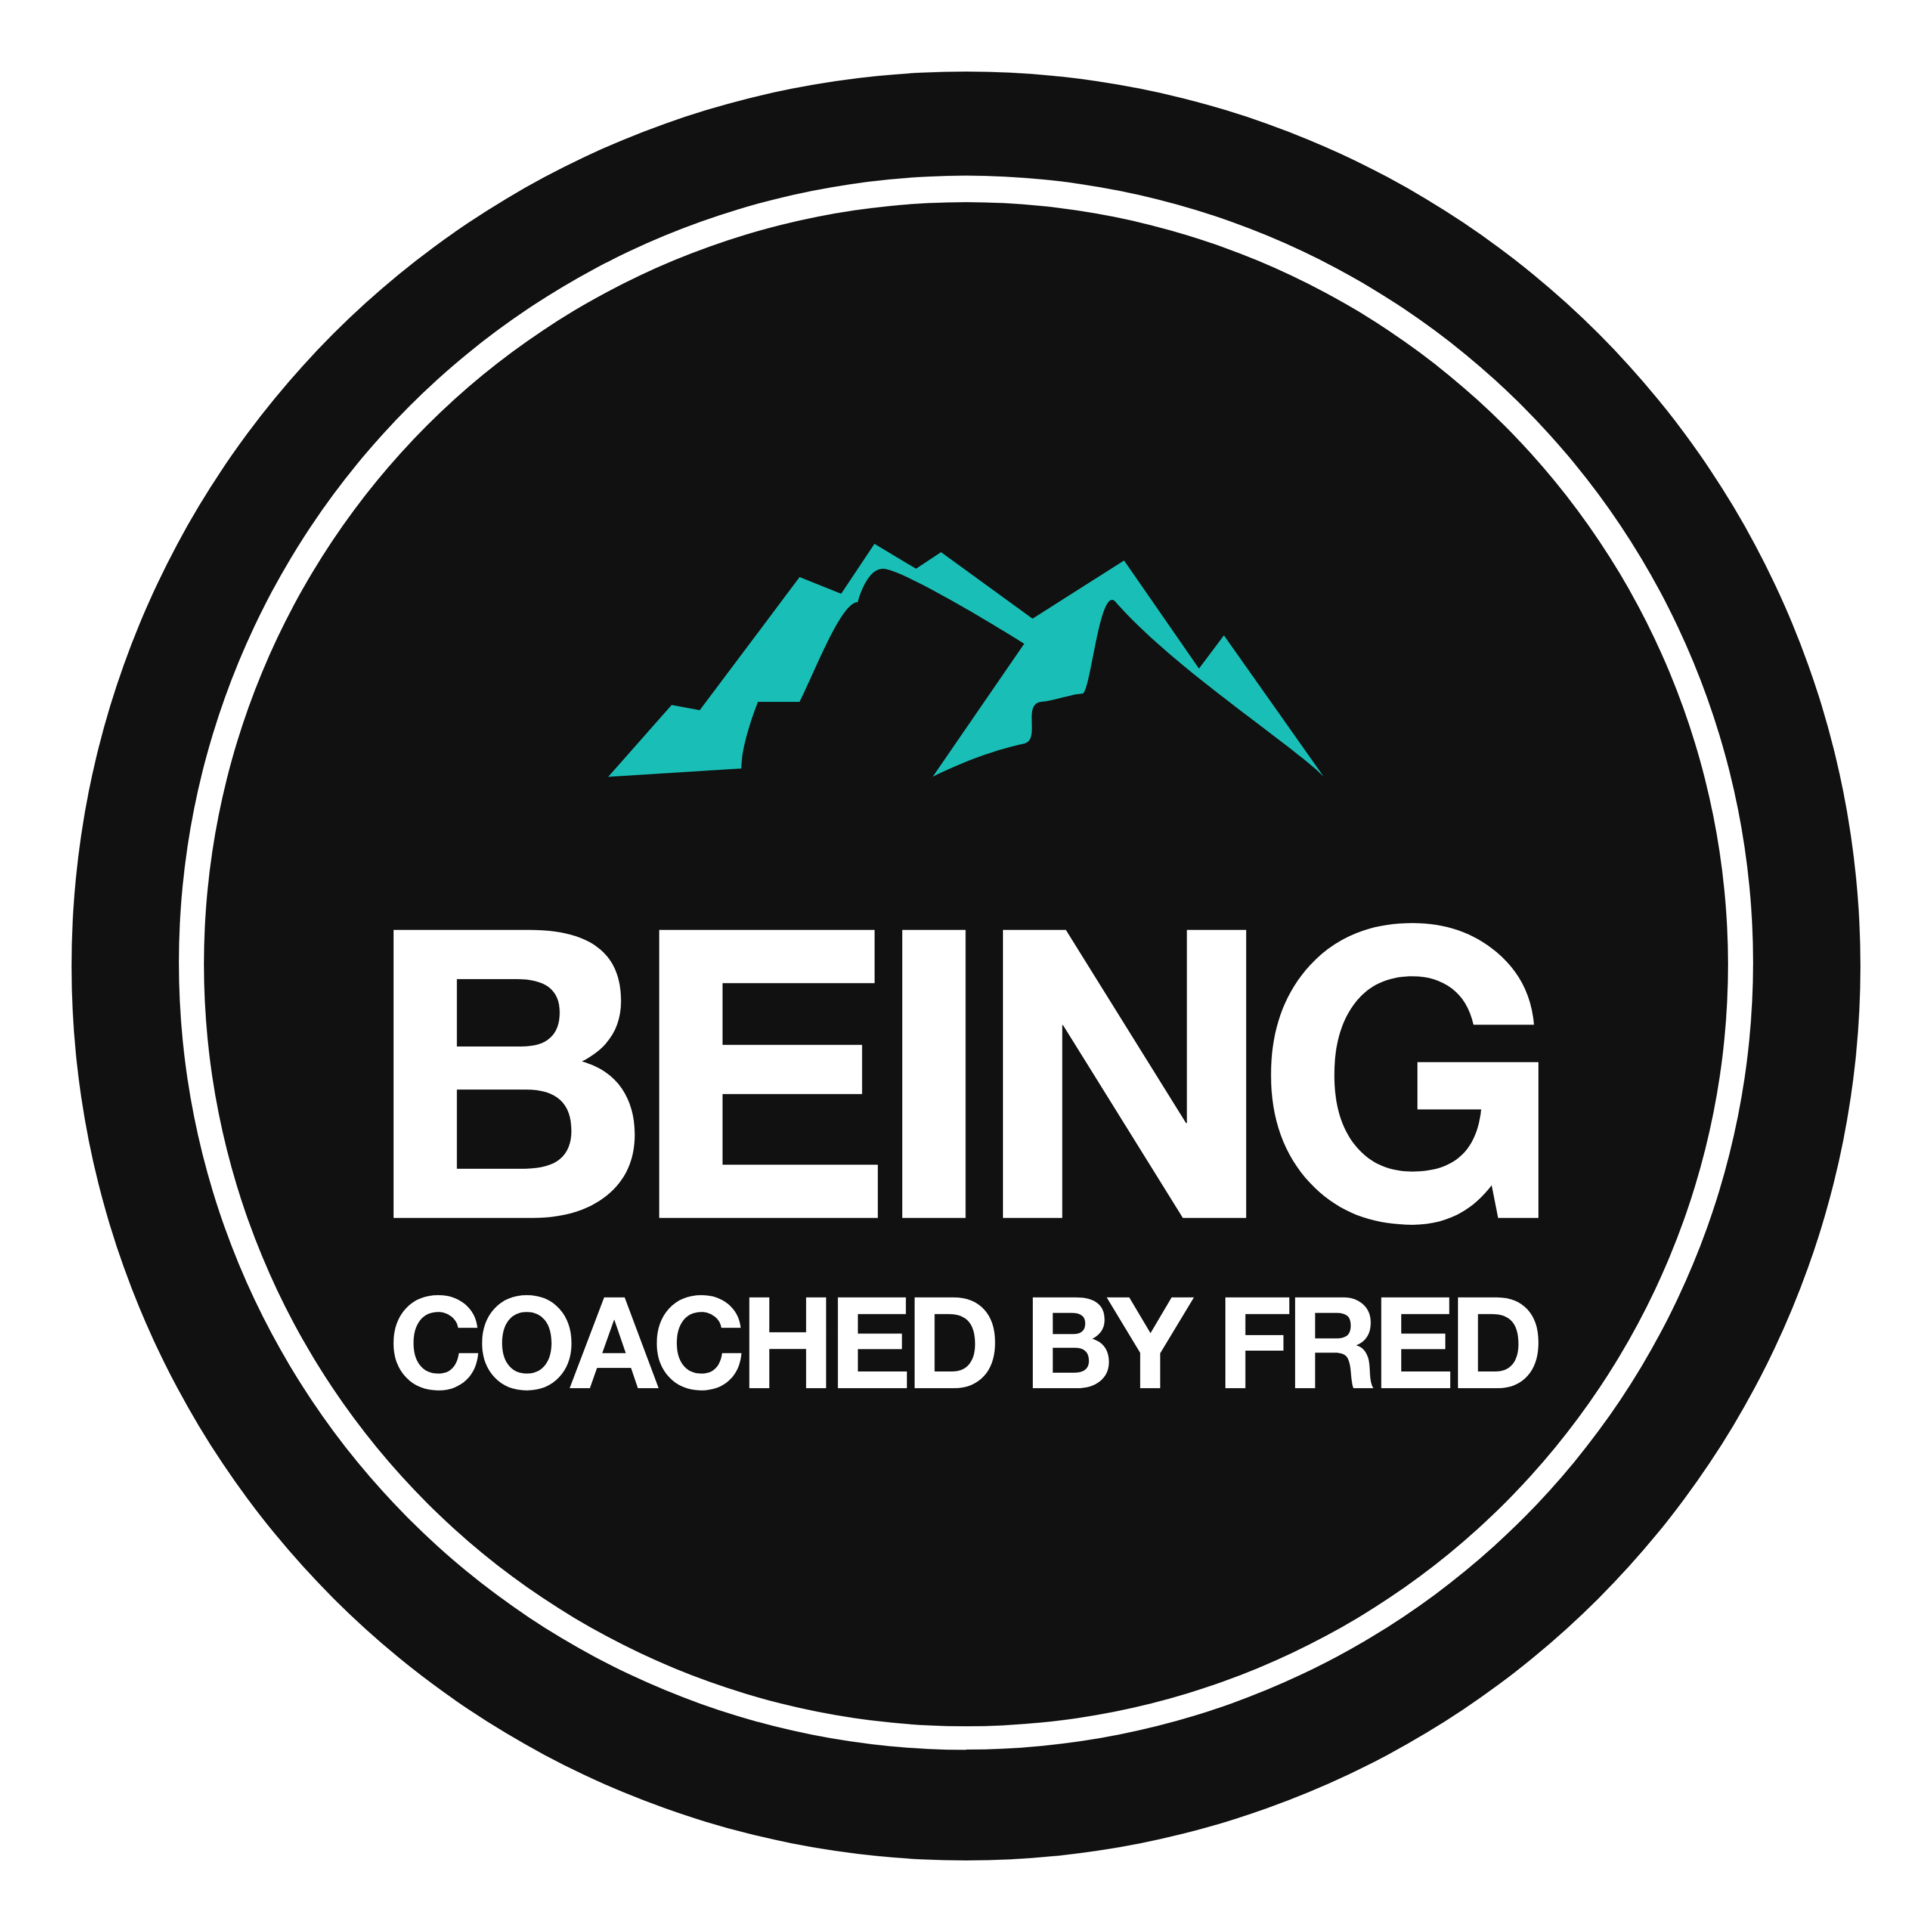 Being Coached By Fred